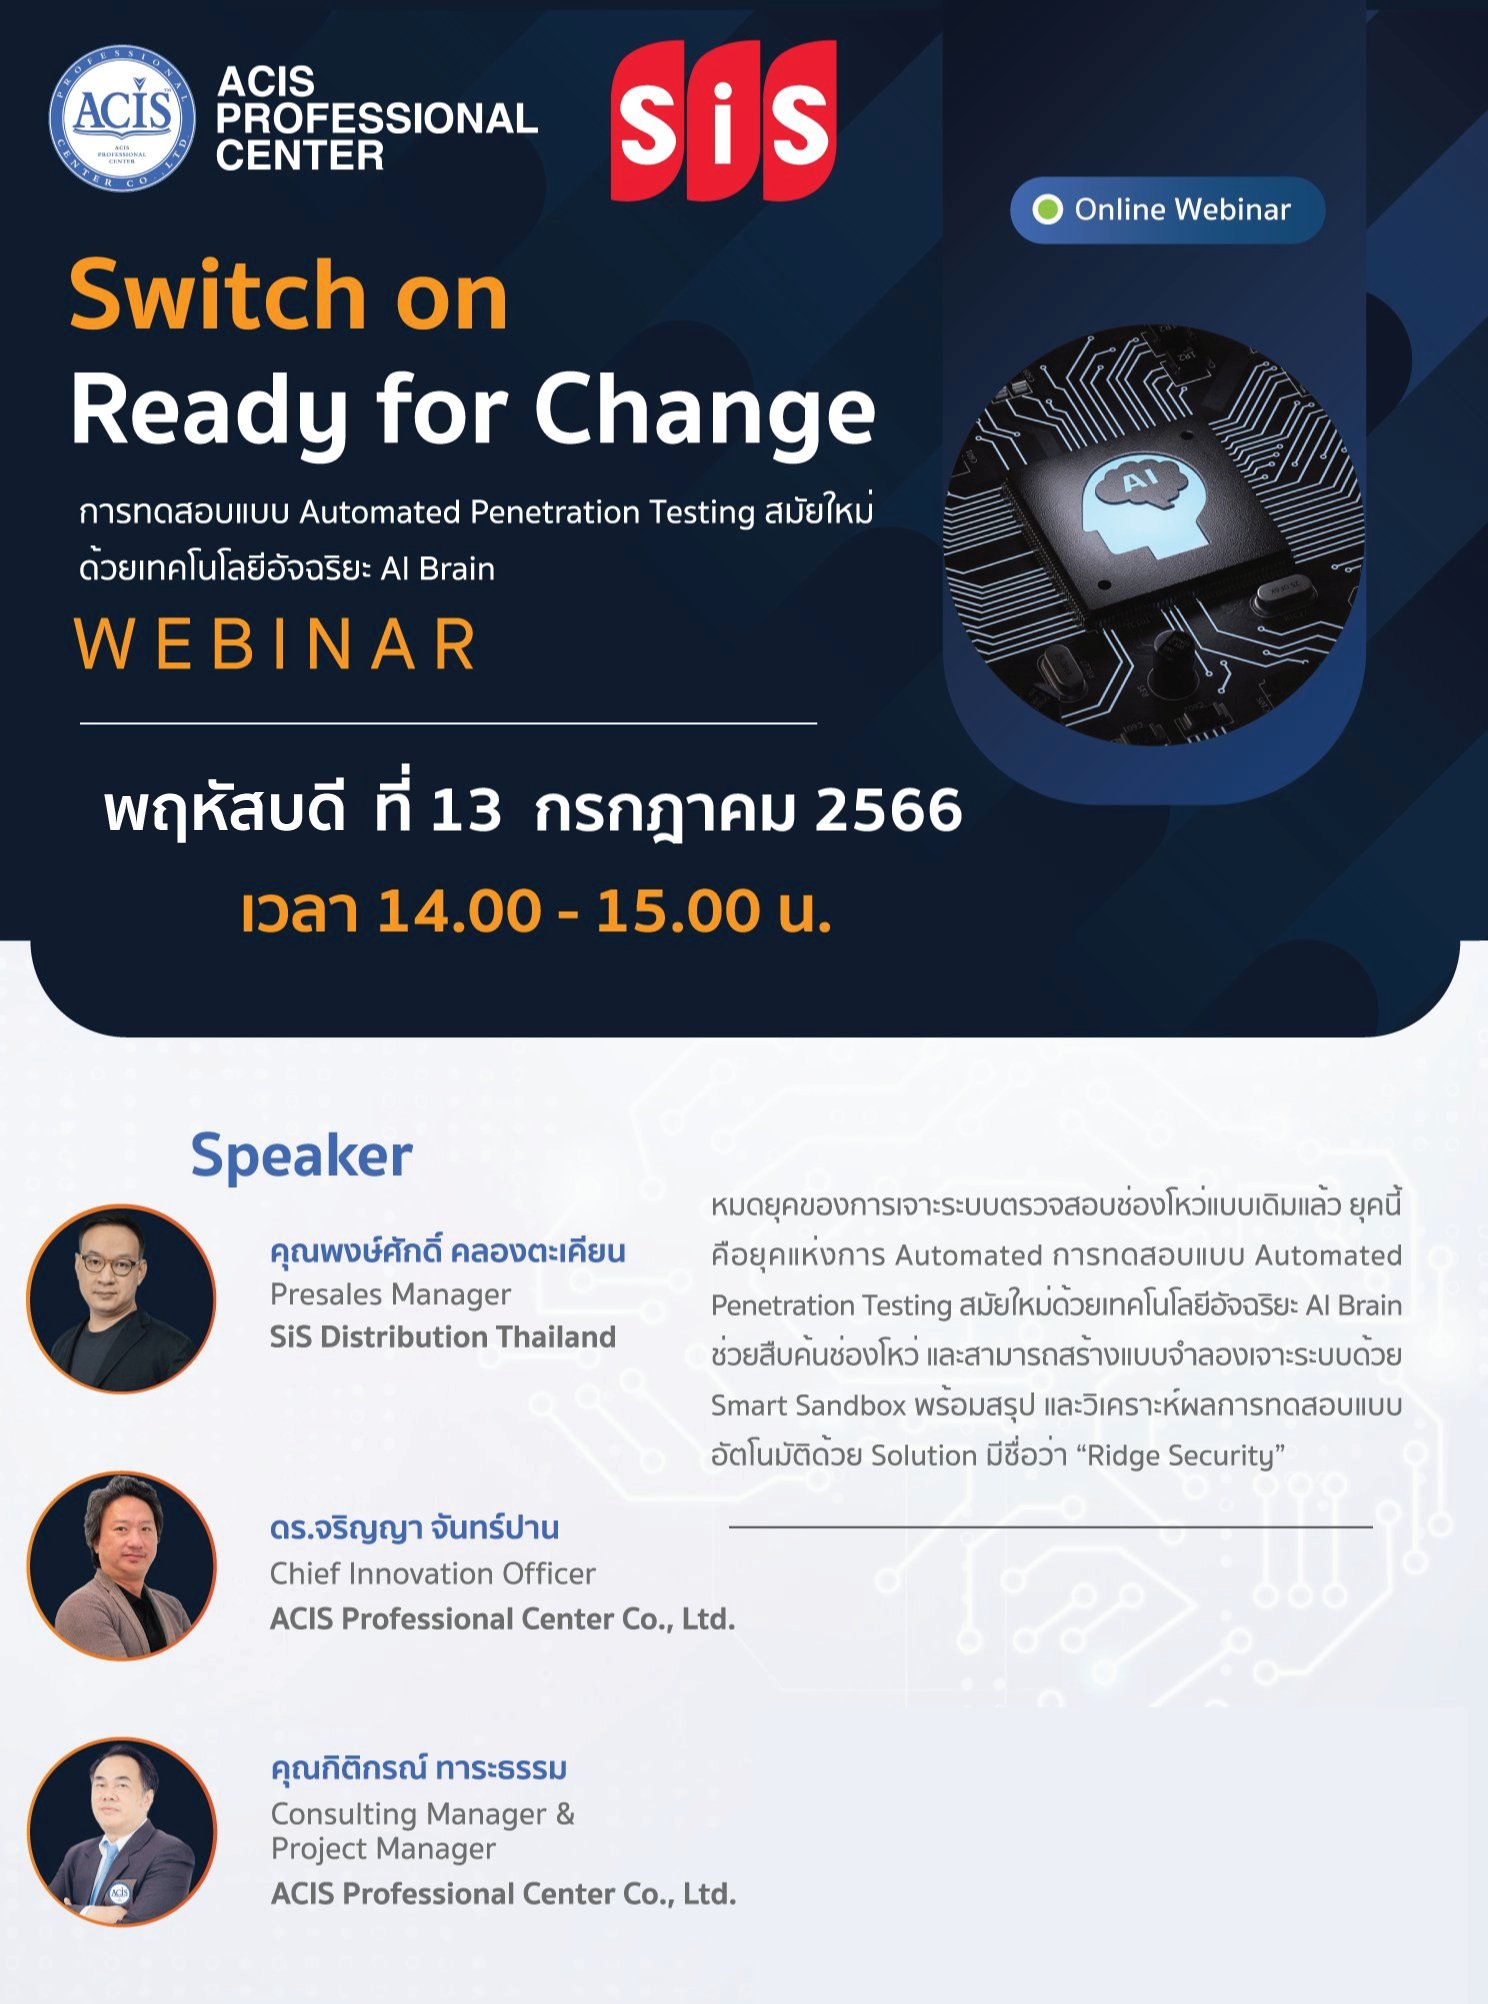 Image:บรรยาย "Switch on Ready for 
Change"